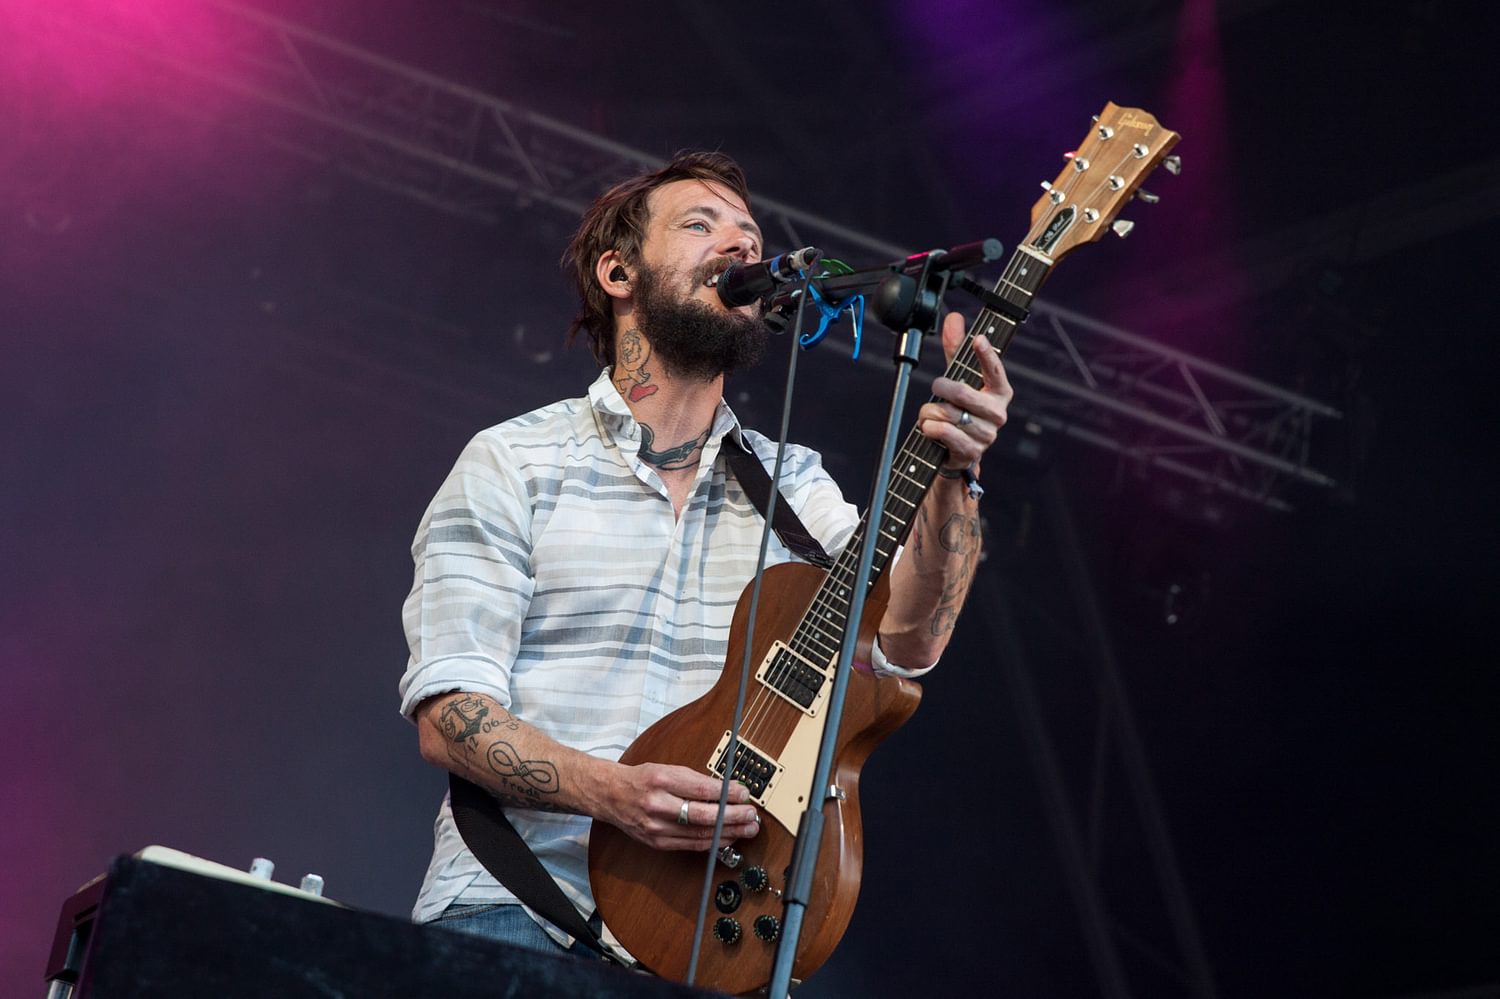 Band Of Horses: "There are no rules now"